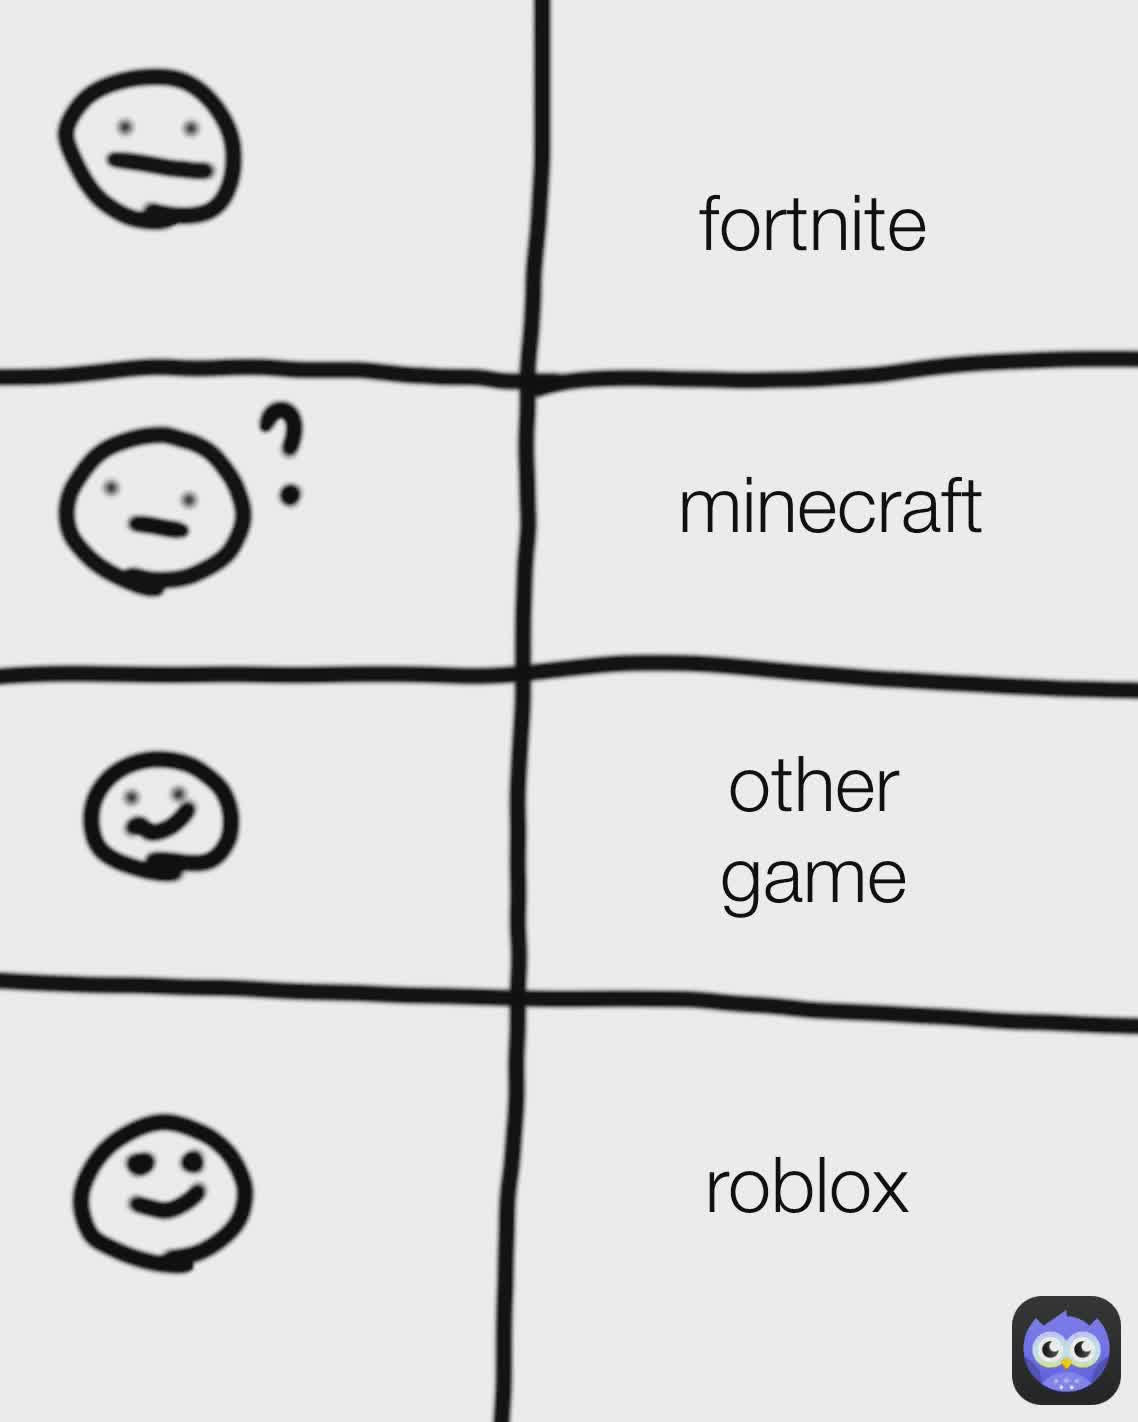 fortnite minecraft other game roblox